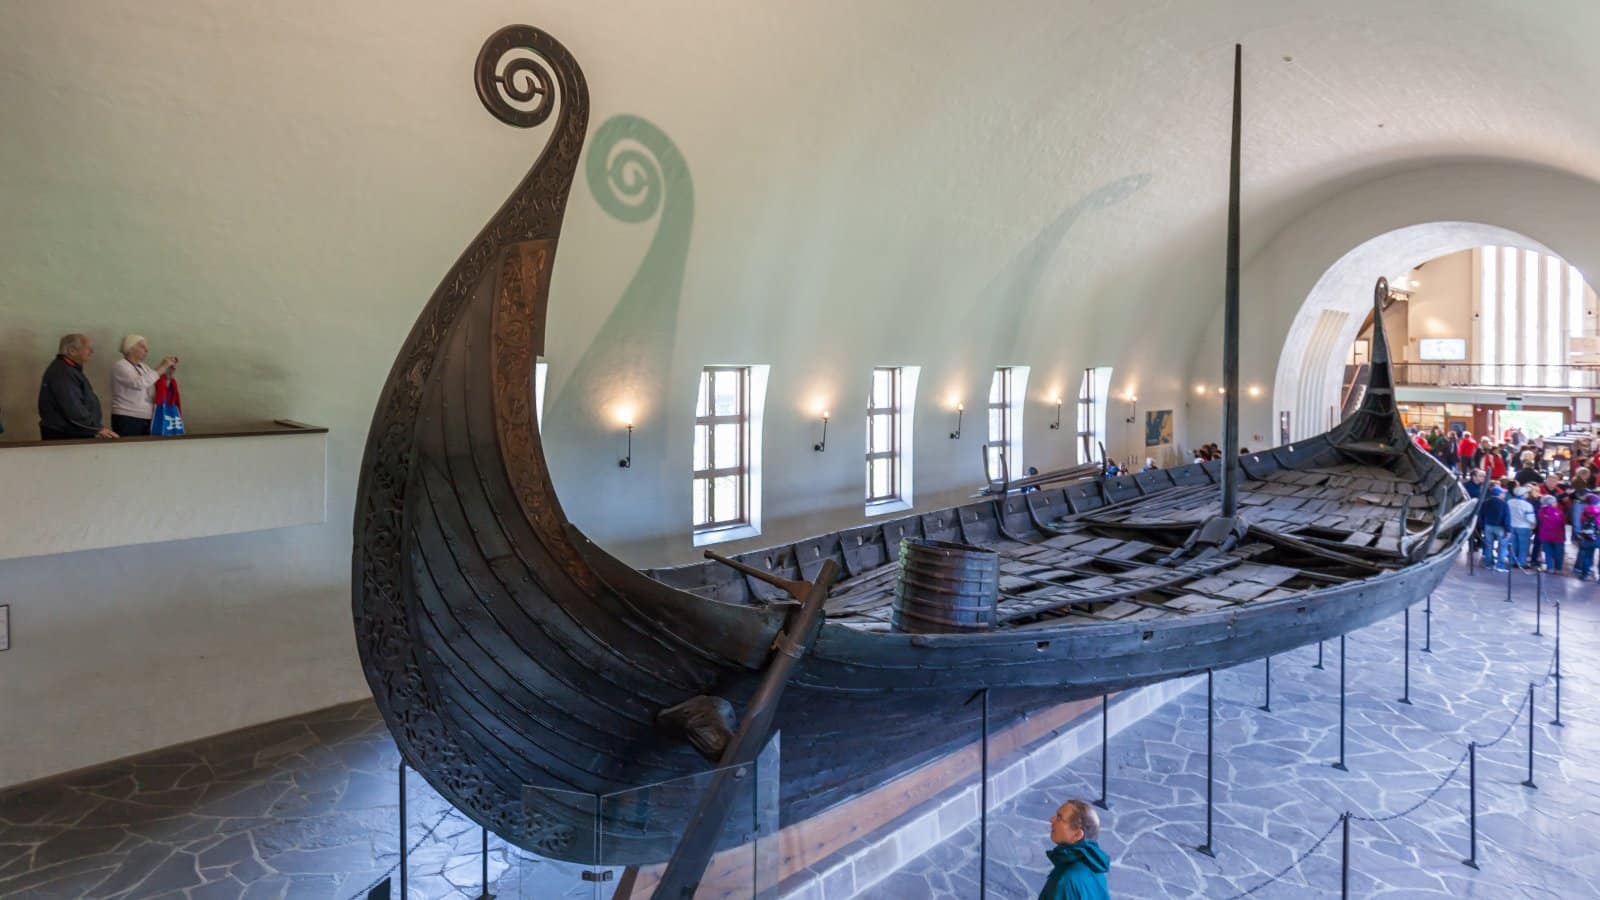 <p class="wp-caption-text">Image Credit: Shutterstock / JHVEPhoto</p>  <p><span>The Viking Ship Museum in Oslo houses some of the best-preserved Viking ships in the world, along with a wealth of artifacts from the Viking Age. The museum’s highlights include the Oseberg ship, known for its intricate woodcarvings, and the Gokstad ship, a great example of Viking shipbuilding skill. These artifacts offer insights into the maritime expertise of the Vikings and their journeys across the seas. The museum also explores the societal roles and daily lives of the Vikings.</span></p> <p><b>Insider’s Tip: </b><span>Plan your visit to coincide with one of the museum’s special exhibitions or public lectures, which offer deeper dives into specific aspects of Viking culture and history.</span></p> <p><b>When to Travel: </b><span>The museum is open year-round, but visiting from May to August allows you to enjoy Oslo’s vibrant summer atmosphere.</span></p> <p><b>How to Get There: </b><span>The Viking Ship Museum is located on the Bygdøy Peninsula in Oslo. It can be reached by bus, ferry (in the summer months), or car from the city center.</span></p>